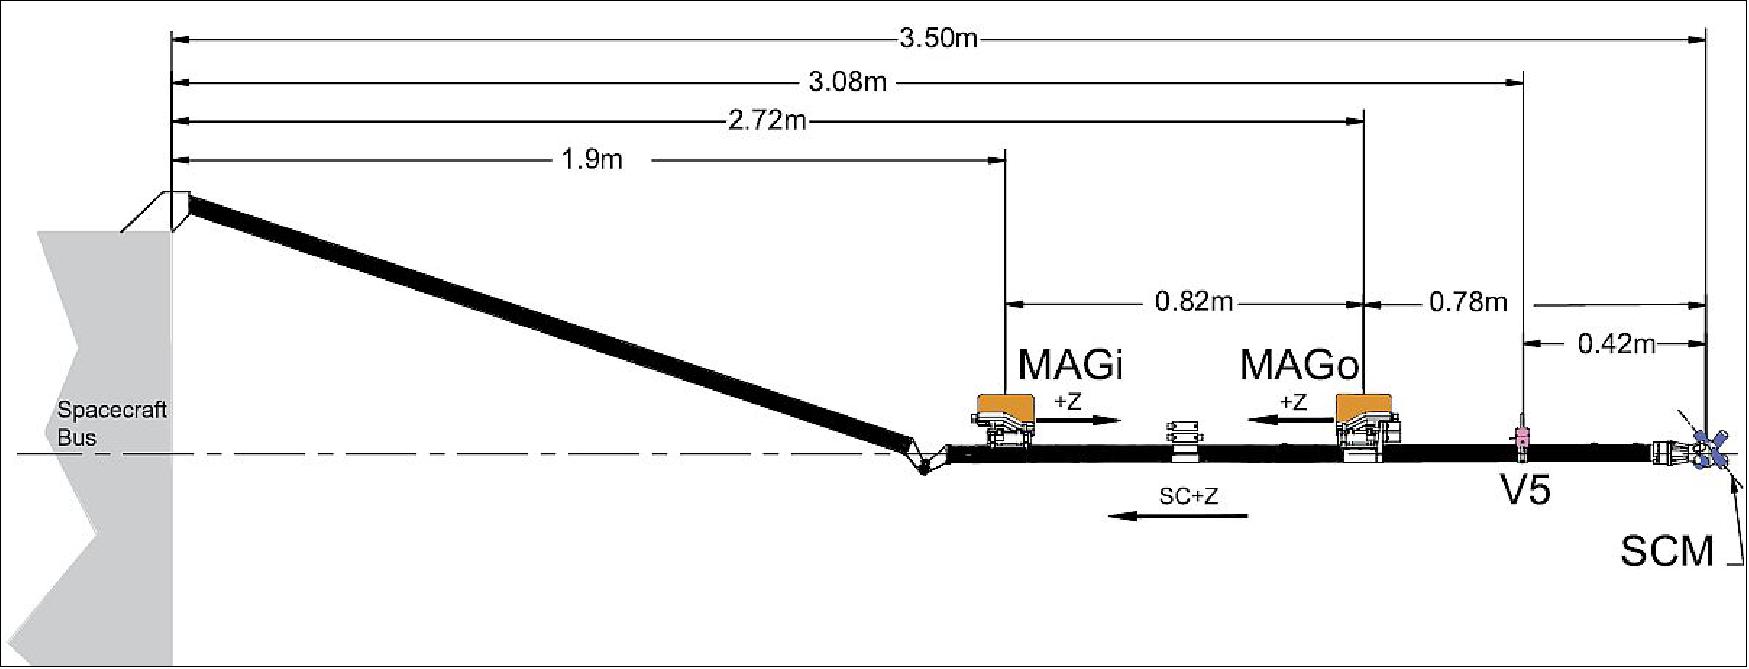 Figure 118: A schematic of the spacecraft magnetometer boom and sensors, shown deployed. Two fluxgate magnetometers are located at 1.9 m (MAGi) and 2.72 m (MAGo) from the rear deck of the spacecraft. The V5 voltage sensor is at 3.08 m and theSCM is located at the end of the boom: 3.5 m from the spacecraft. This is a relatively short boom, constrained to remain in the spacecraft umbra at perihelion. SCM data will require special processing to remove the drive signal from the fluxgates (image credit: FIELDS collaboration)